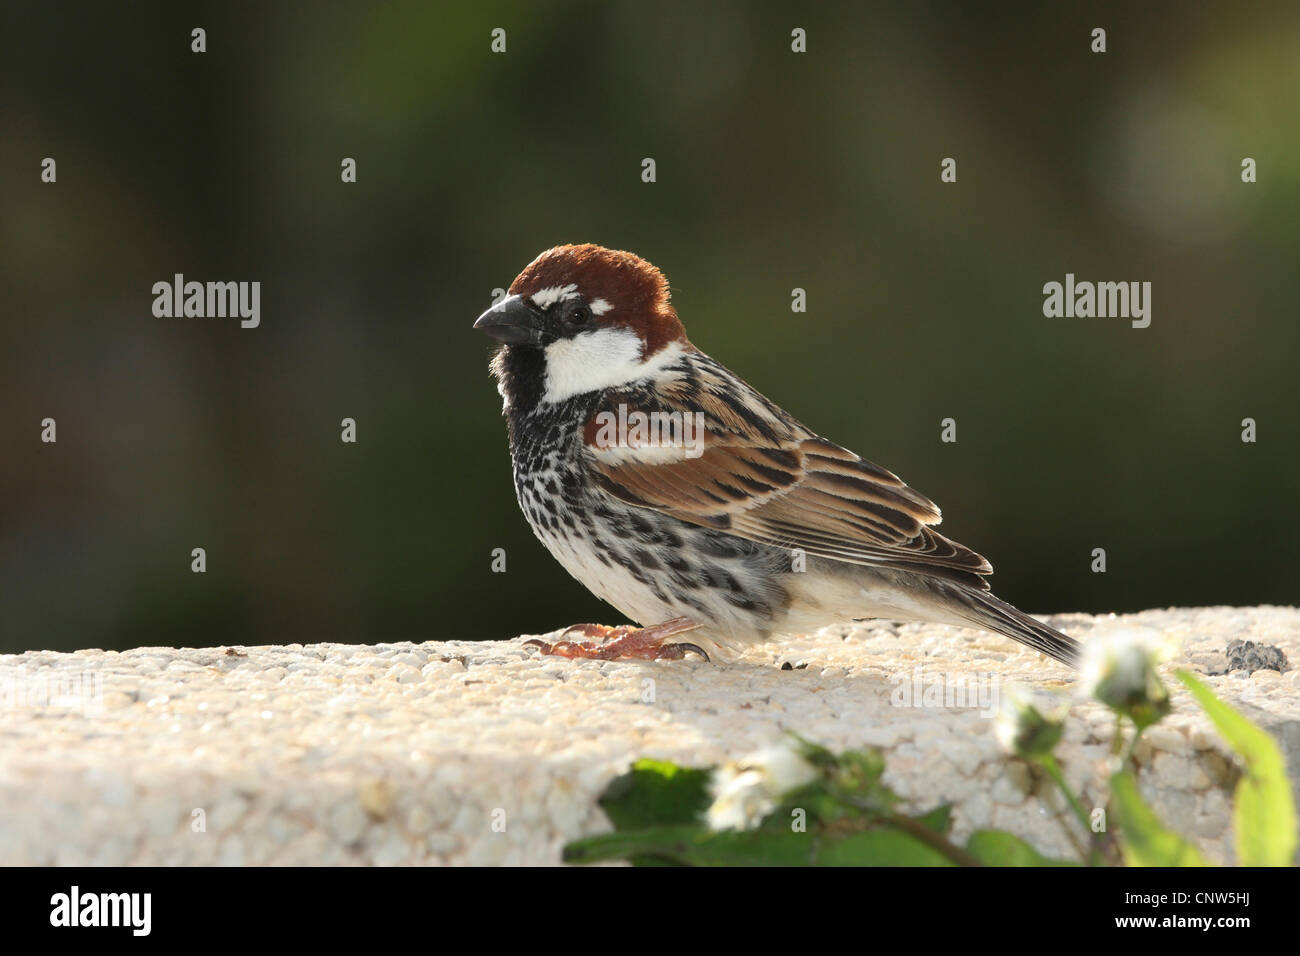 Spanish sparrow (Passer hispaniolensis), sitting on a wall, Canary Islands, Lanzarote Stock Photo